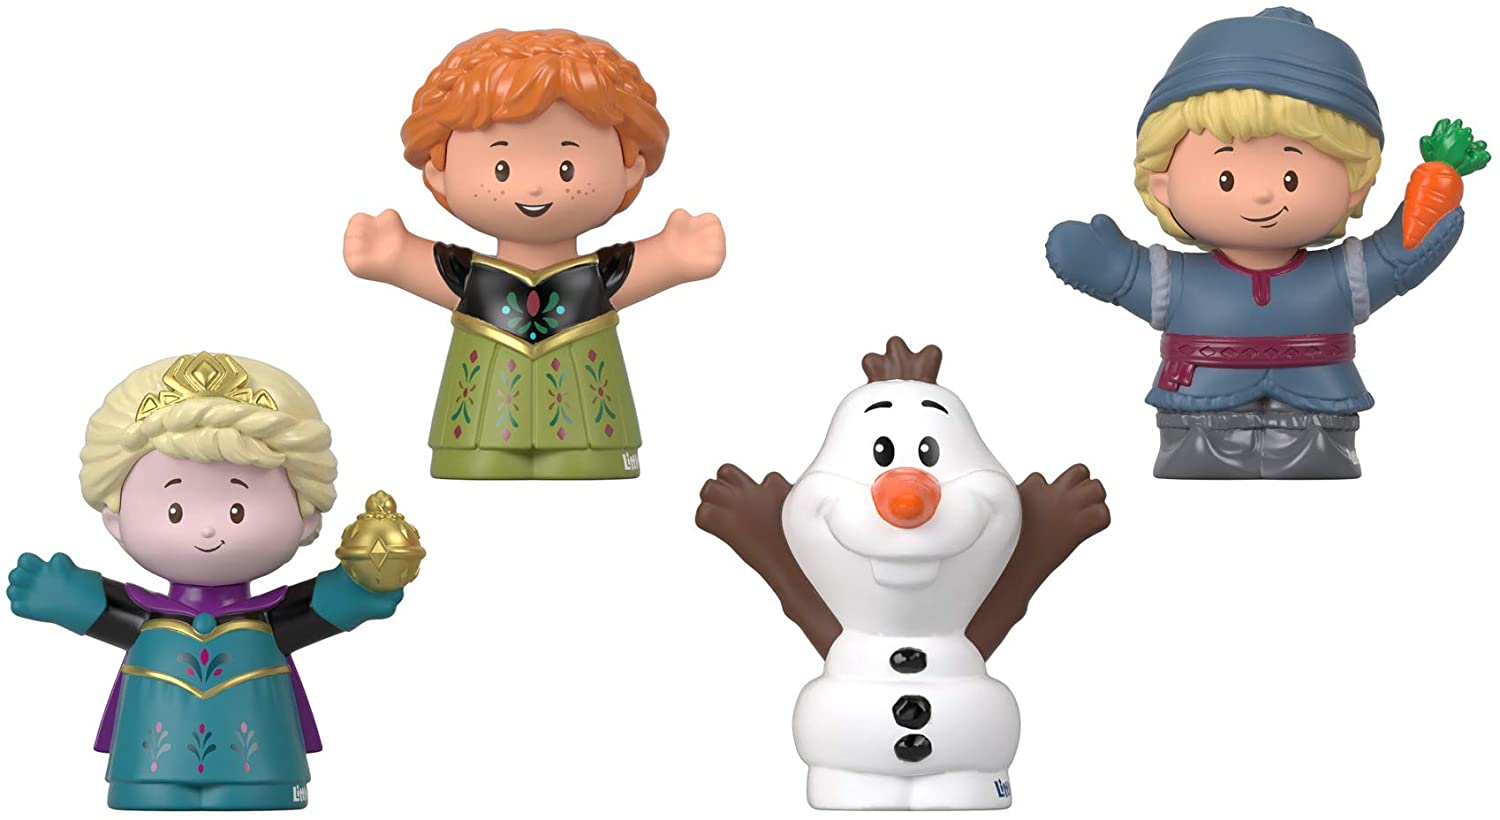 Fisher-Price Gmj13 Little People, "Frozen" 4-Pack Figures Toddler Toy From 